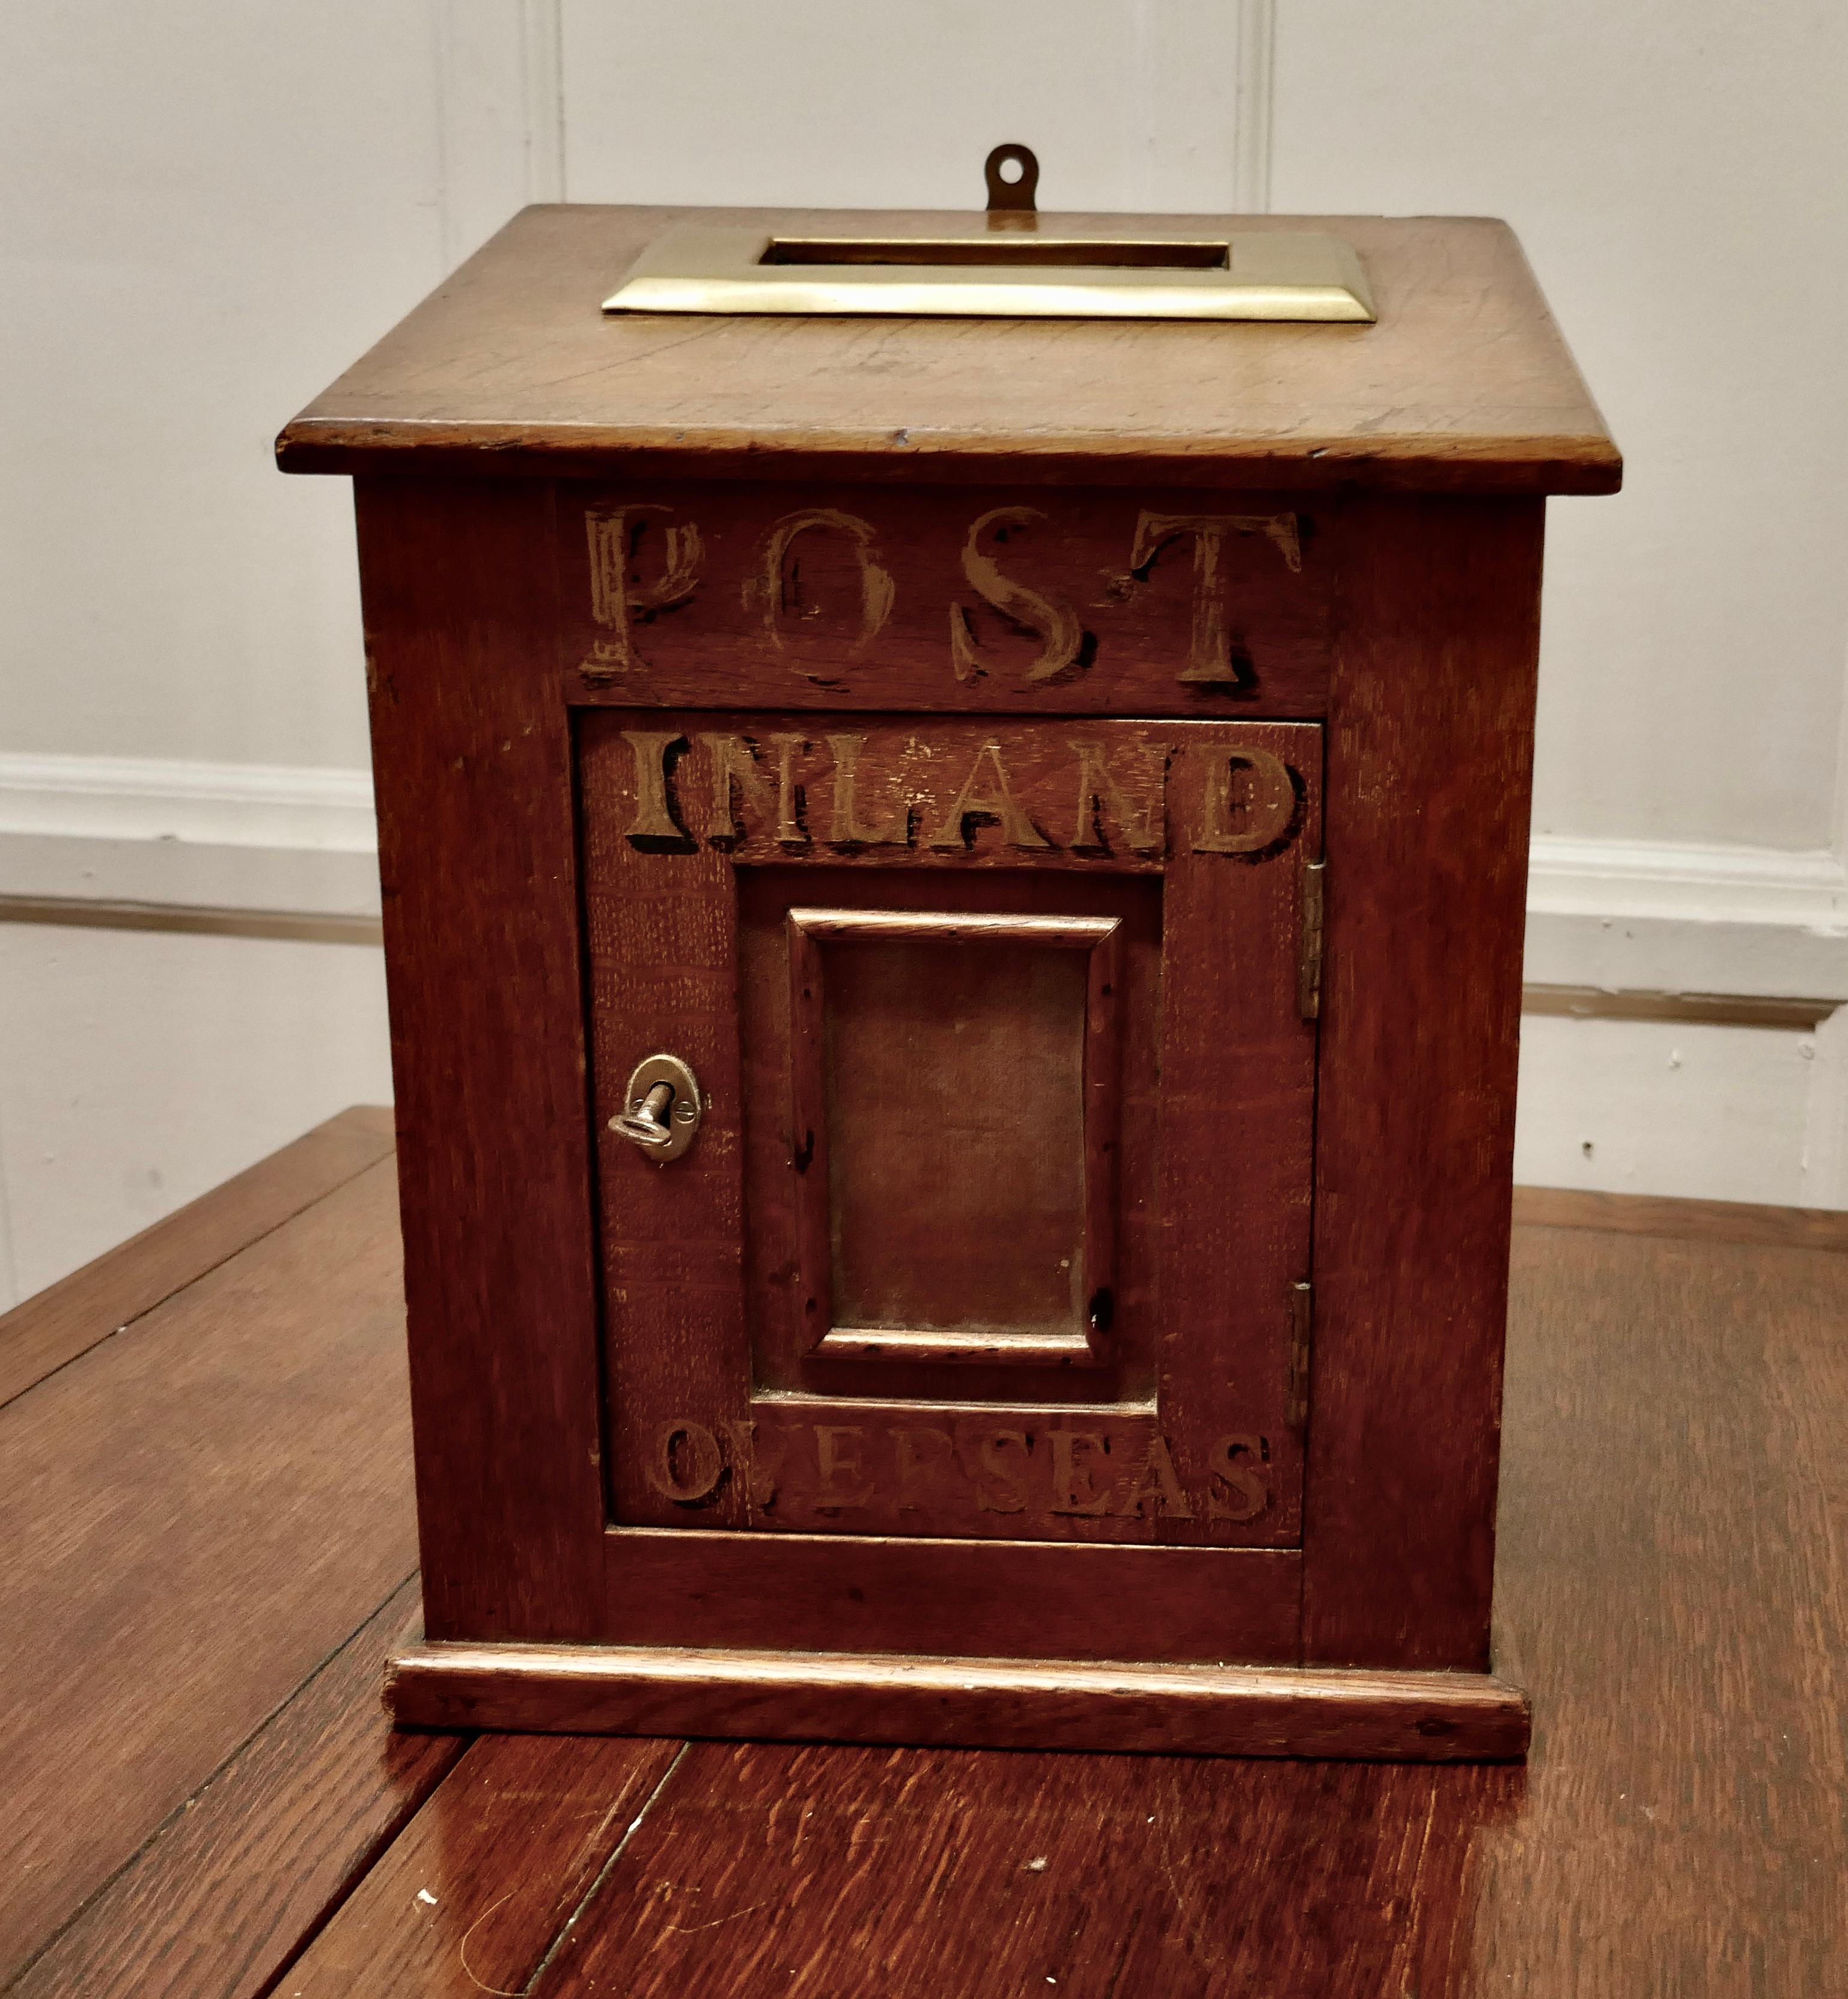 Victorian Country House Letter Box.

The Post Box is made in Golden Oak, it has an etched brass Letter Box at the top, with a small door marked Post, the box has its original working lock and key 
This is a very rare piece and would be a superb